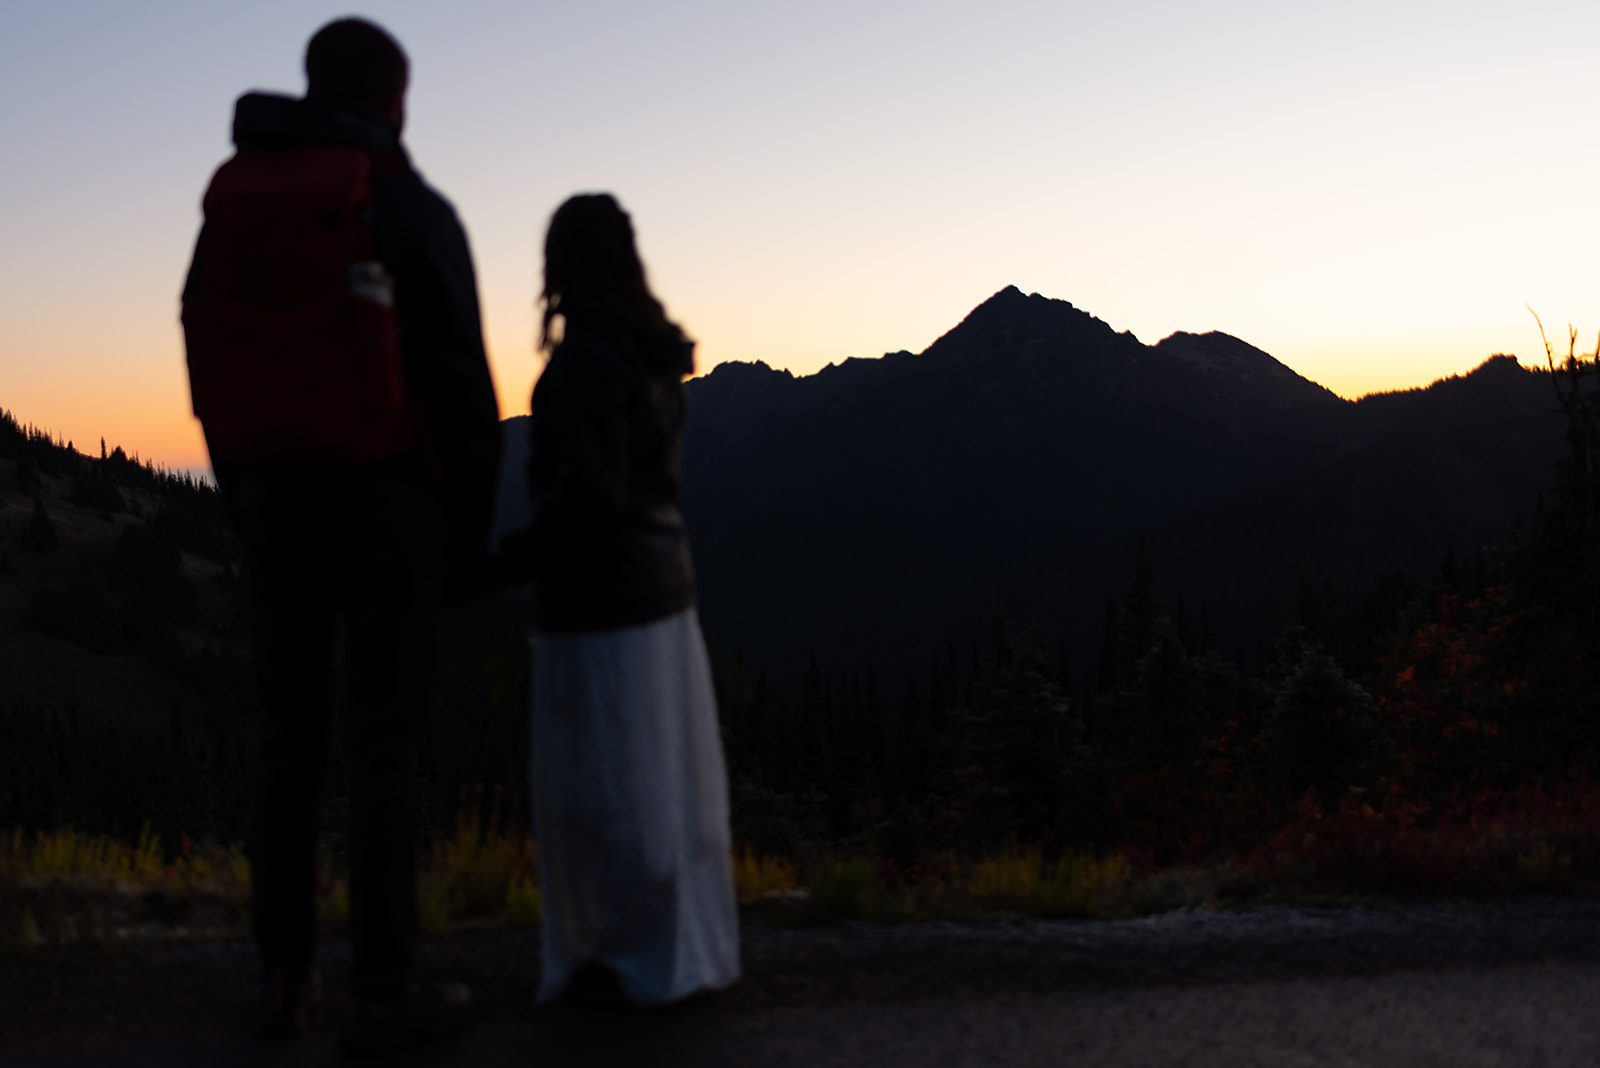 This is a couple on their wedding day at sunrise.